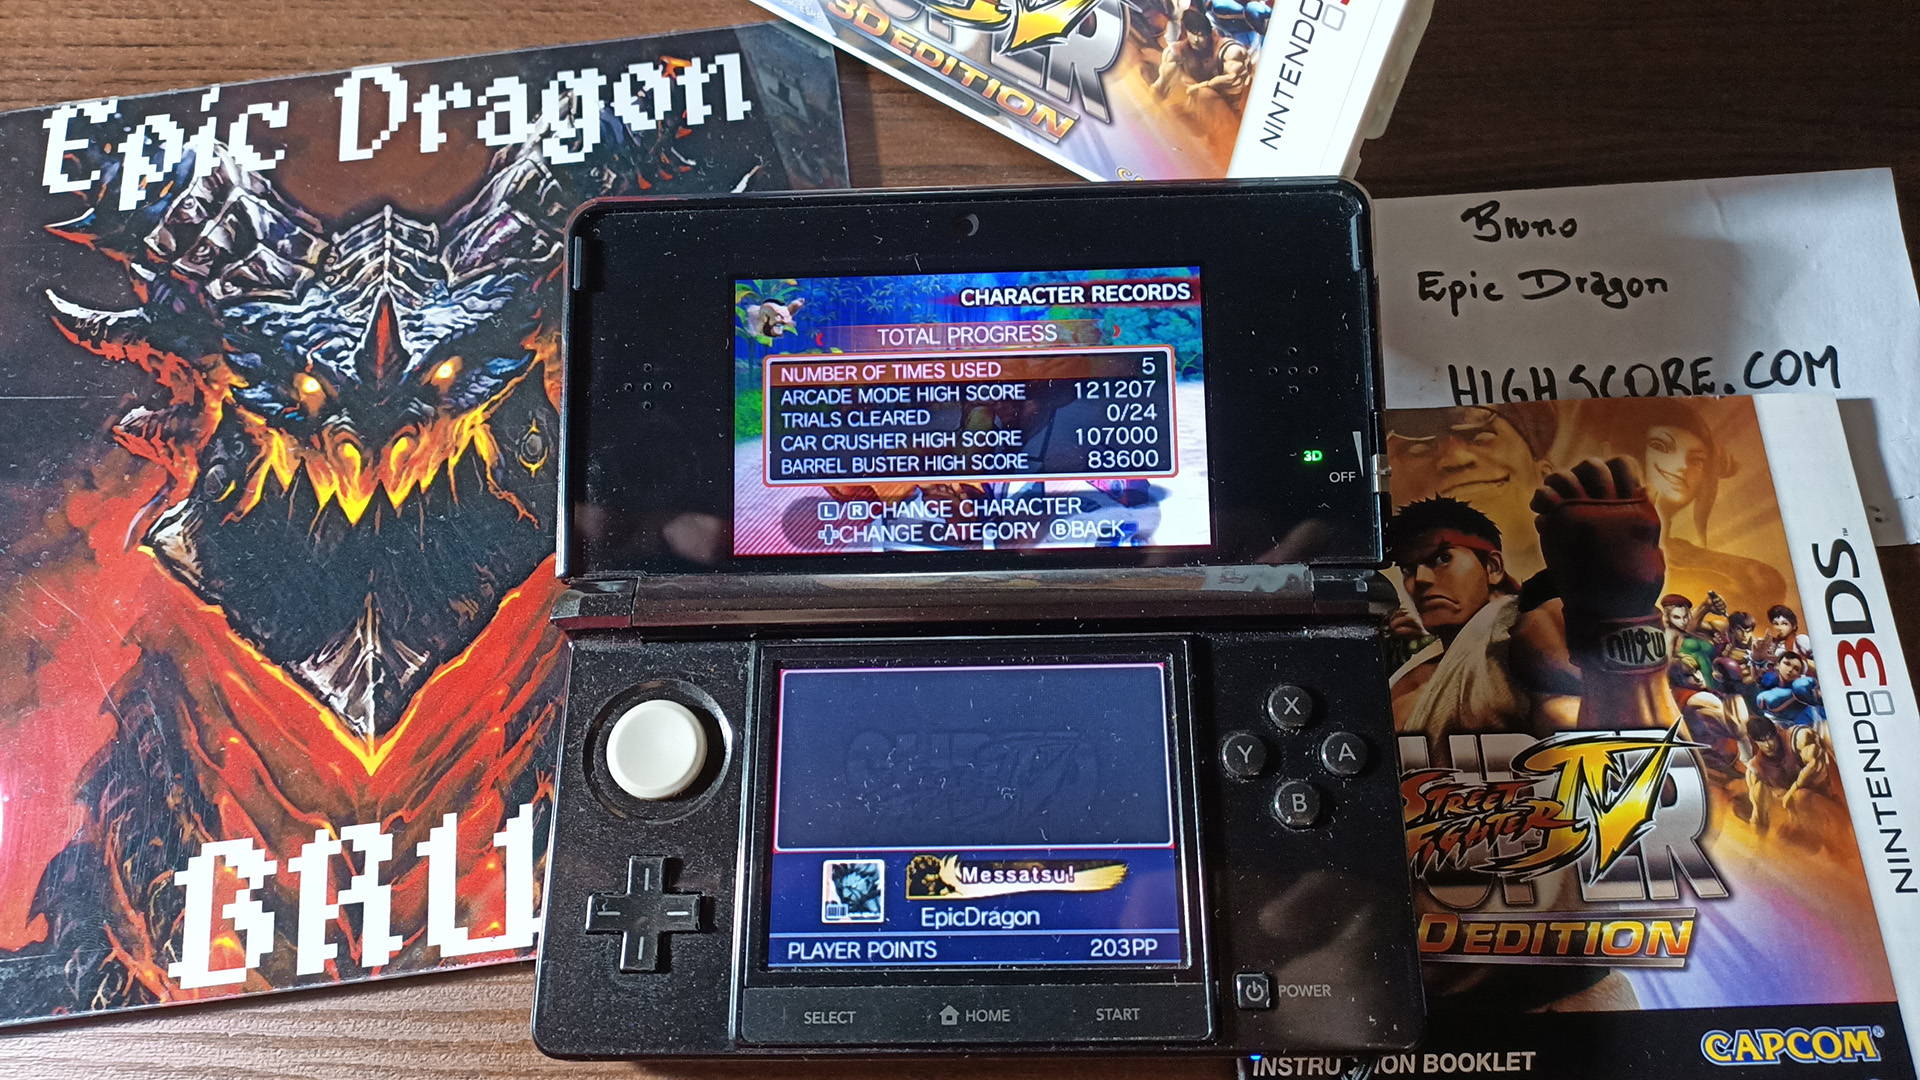 EpicDragon: Super Street Fighter IV 3D Edition: Challenge: Barrel Buster: Zangief (Nintendo 3DS) 83,600 points on 2022-08-28 12:17:56